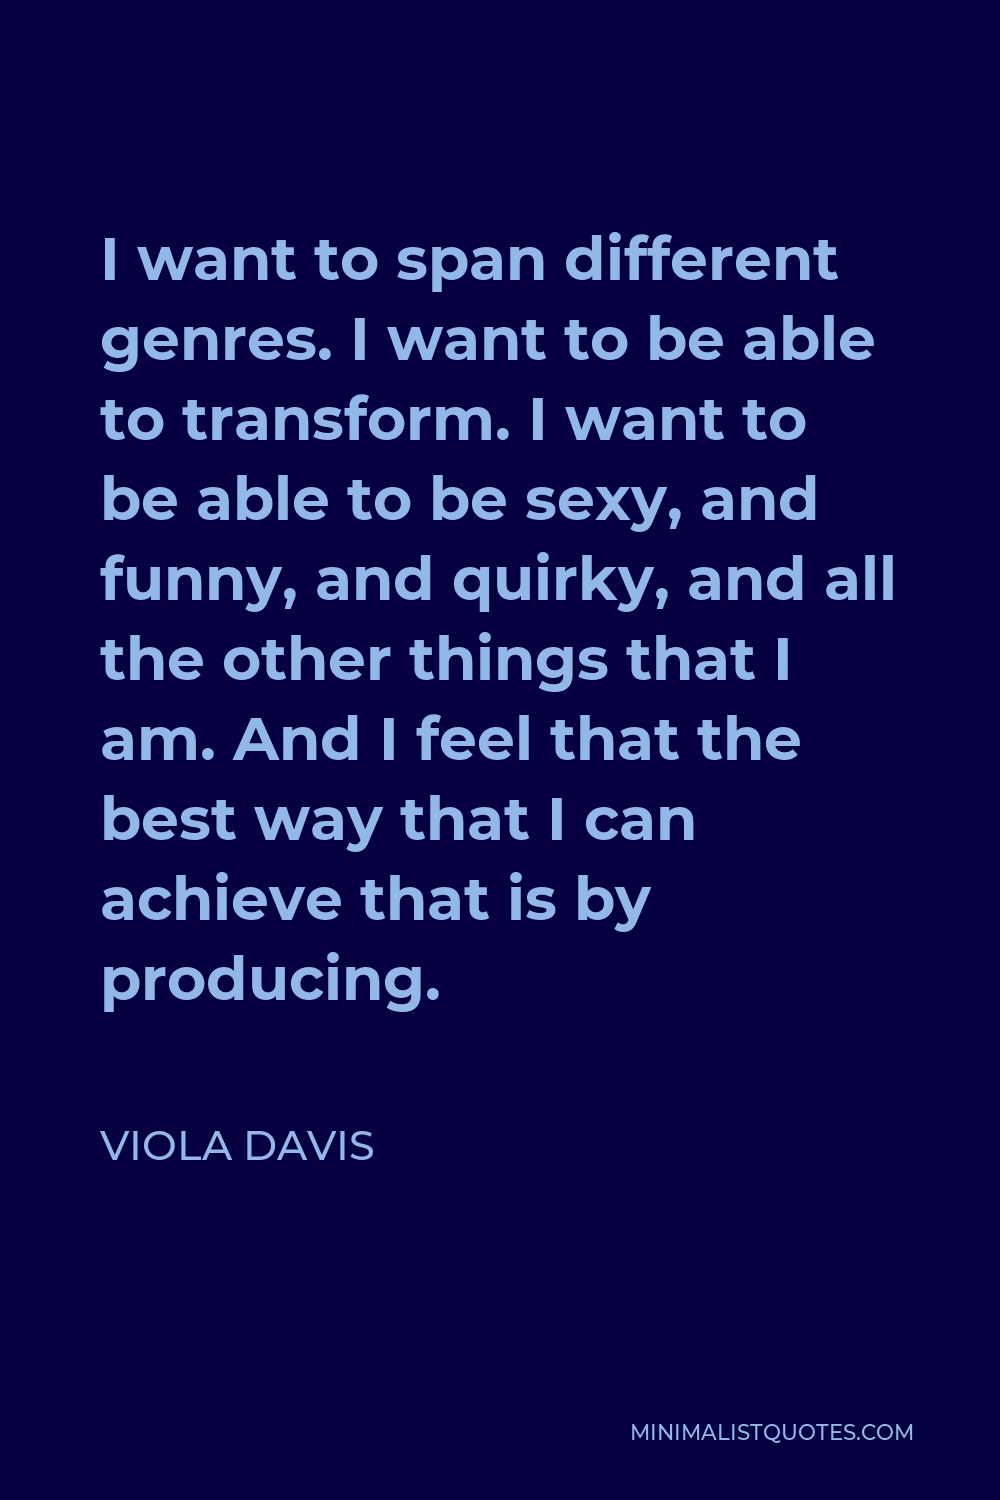 Viola Davis Quote - I want to span different genres. I want to be able to transform. I want to be able to be sexy, and funny, and quirky, and all the other things that I am. And I feel that the best way that I can achieve that is by producing.